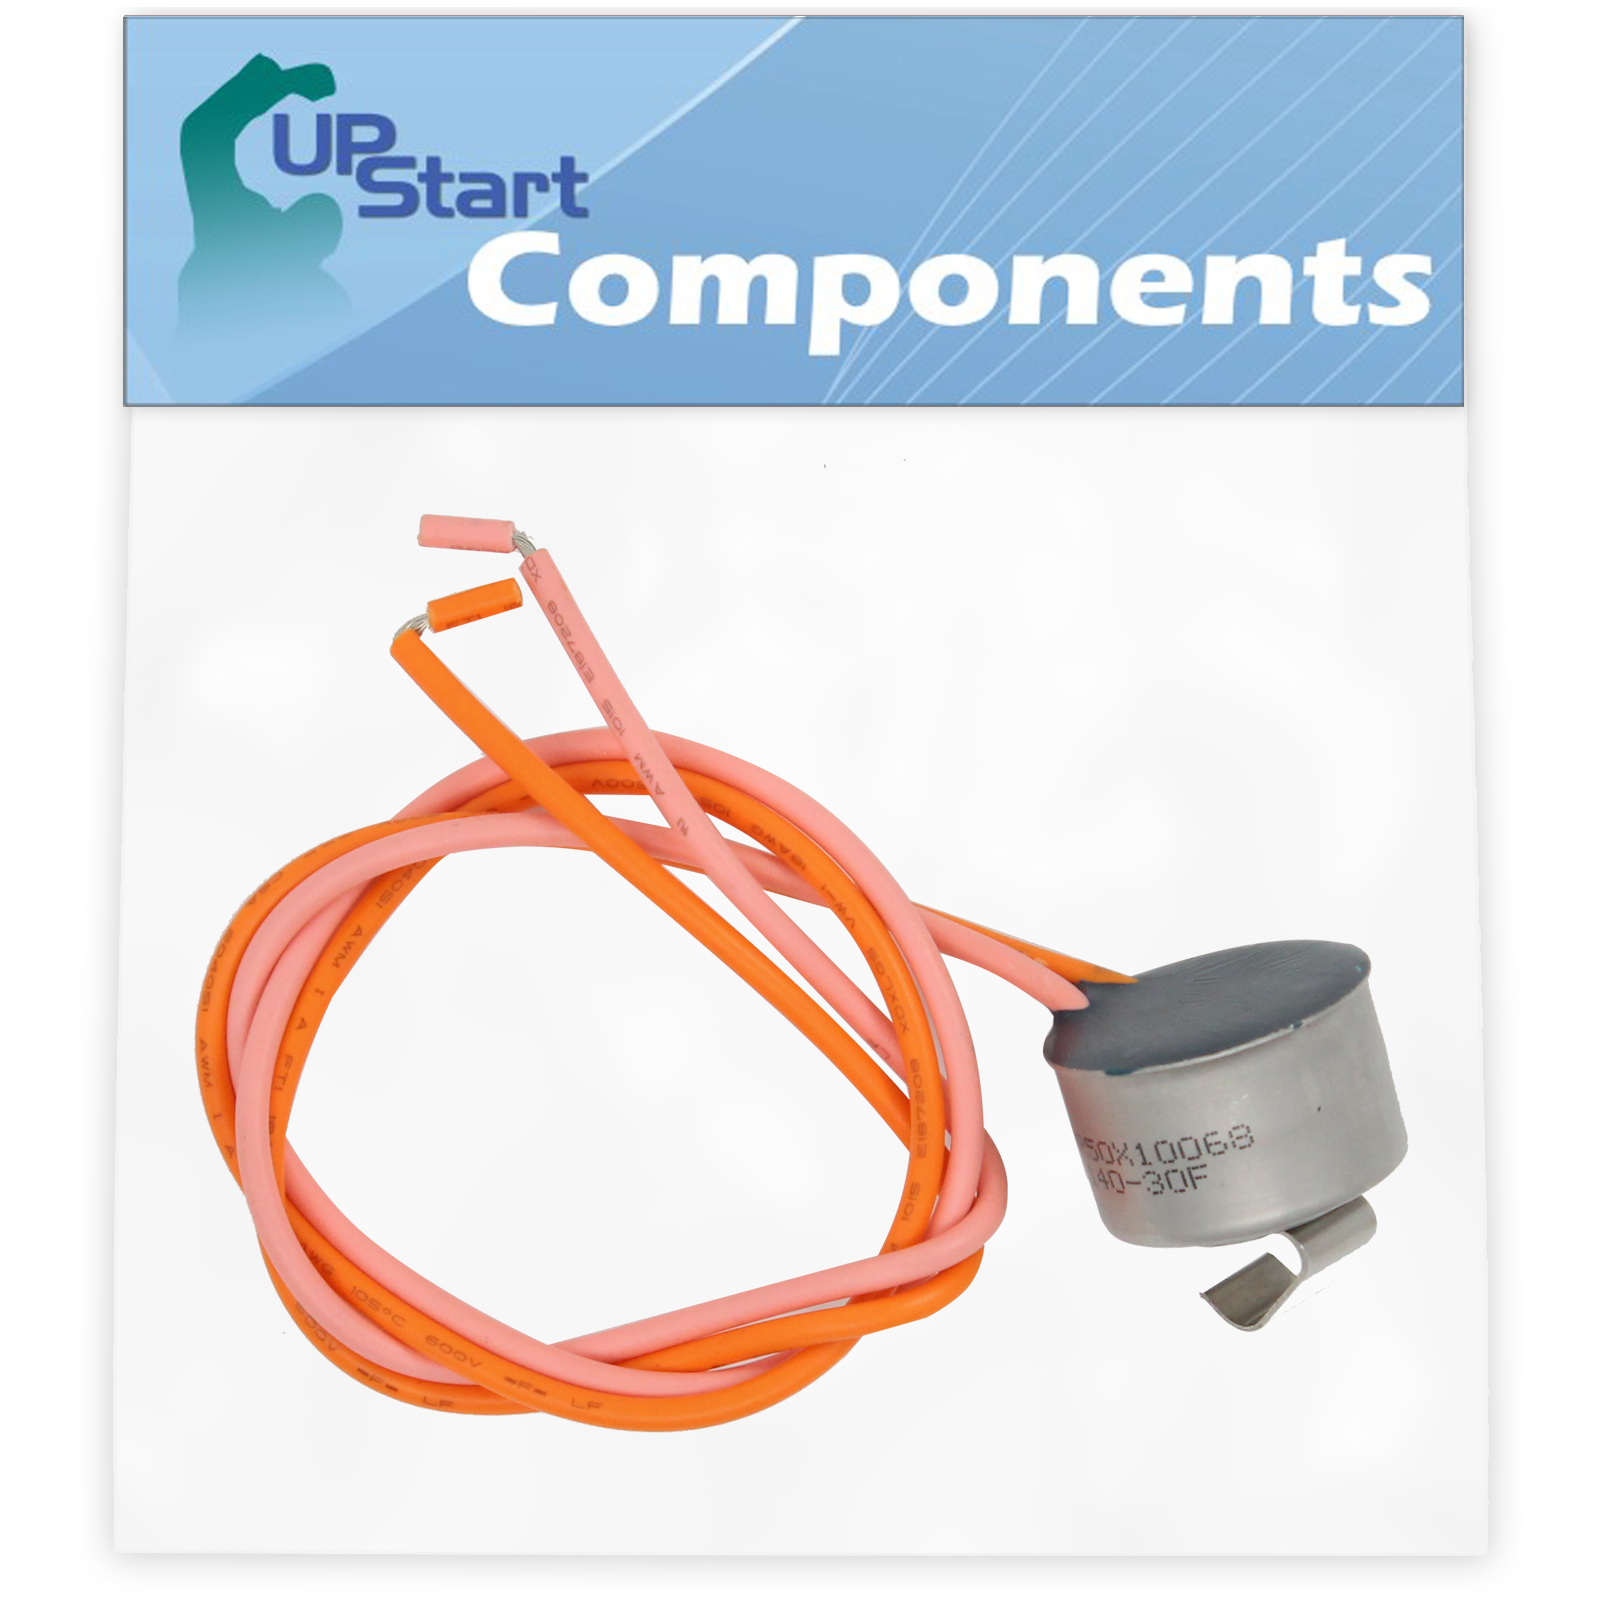 WR50X10068 Defrost Thermostat Replacement for General Electric PCK23NHNDFCC Refrigerator - Compatible with WR50X10068 Defrost Limiter Thermostat - UpStart Components Brand - image 1 of 2